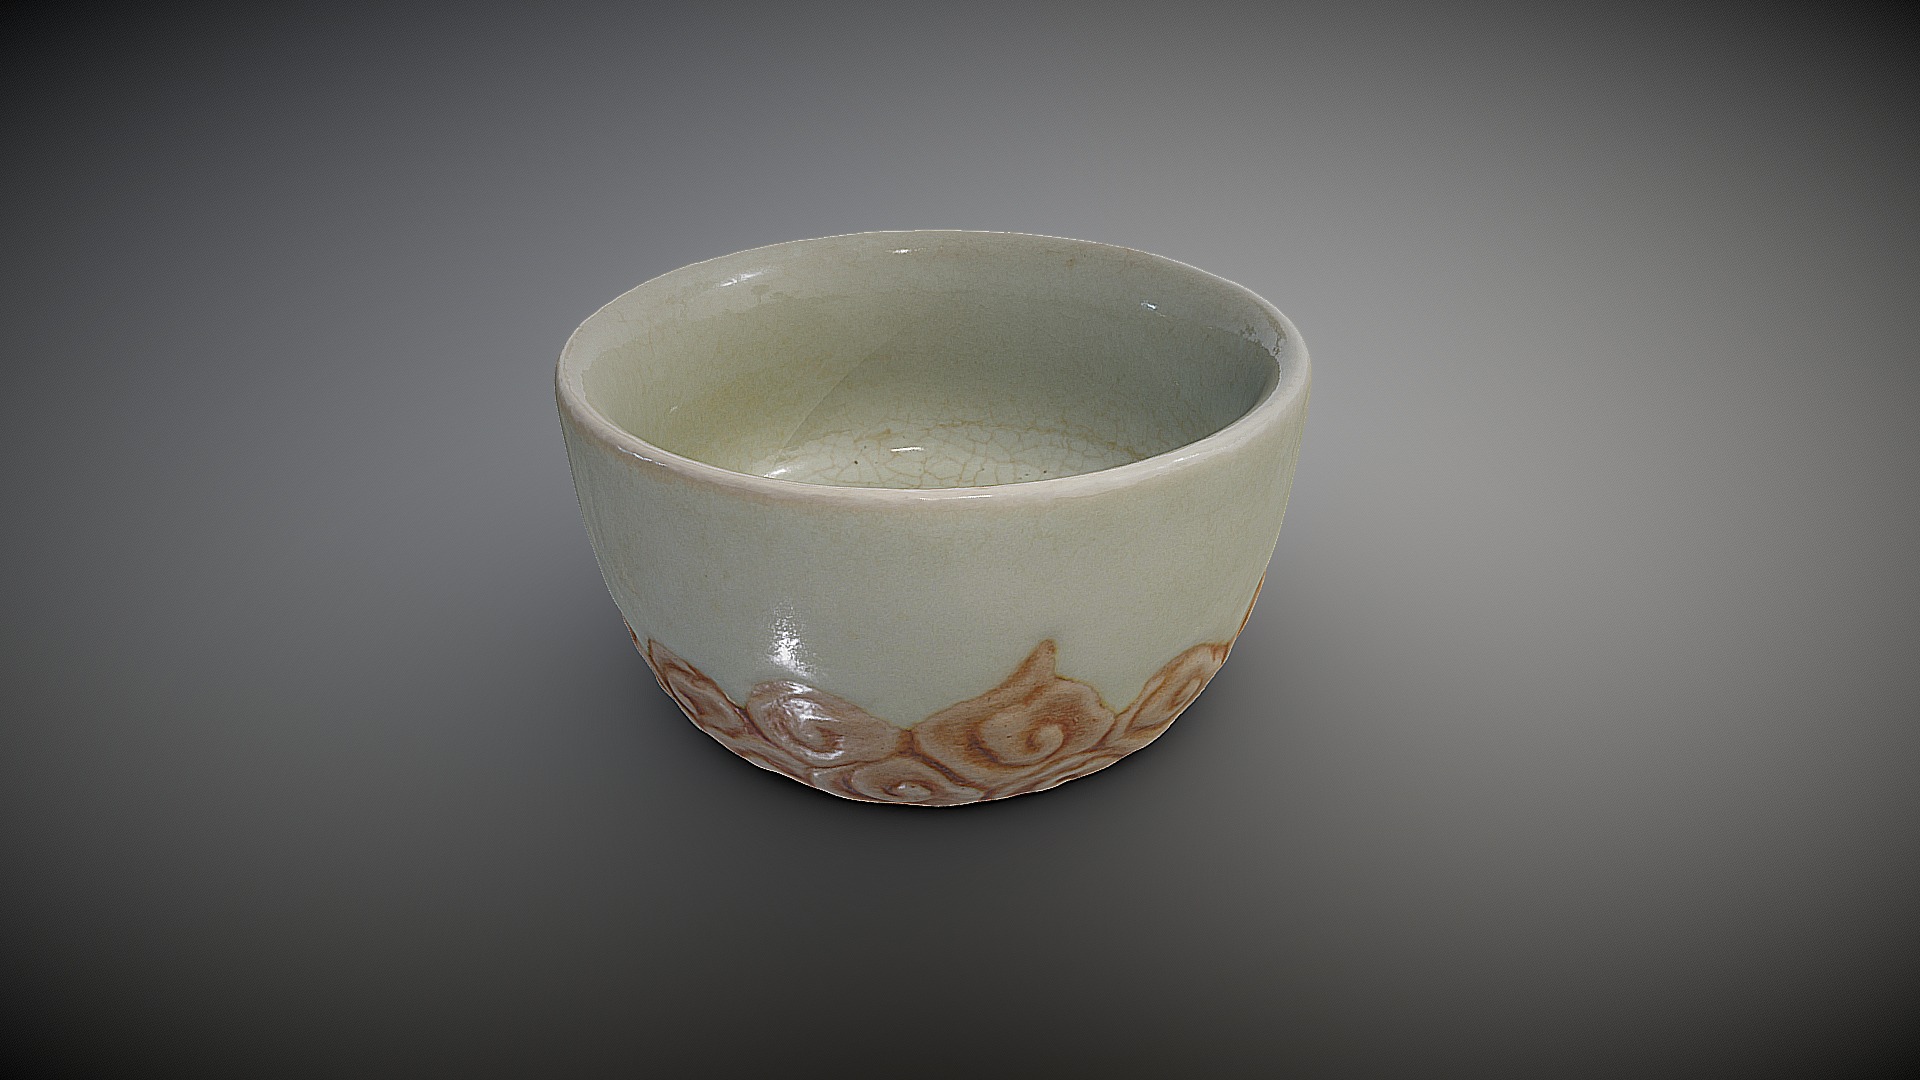 3D model Teacup Model - This is a 3D model of the Teacup Model. The 3D model is about a bowl with a design on it.